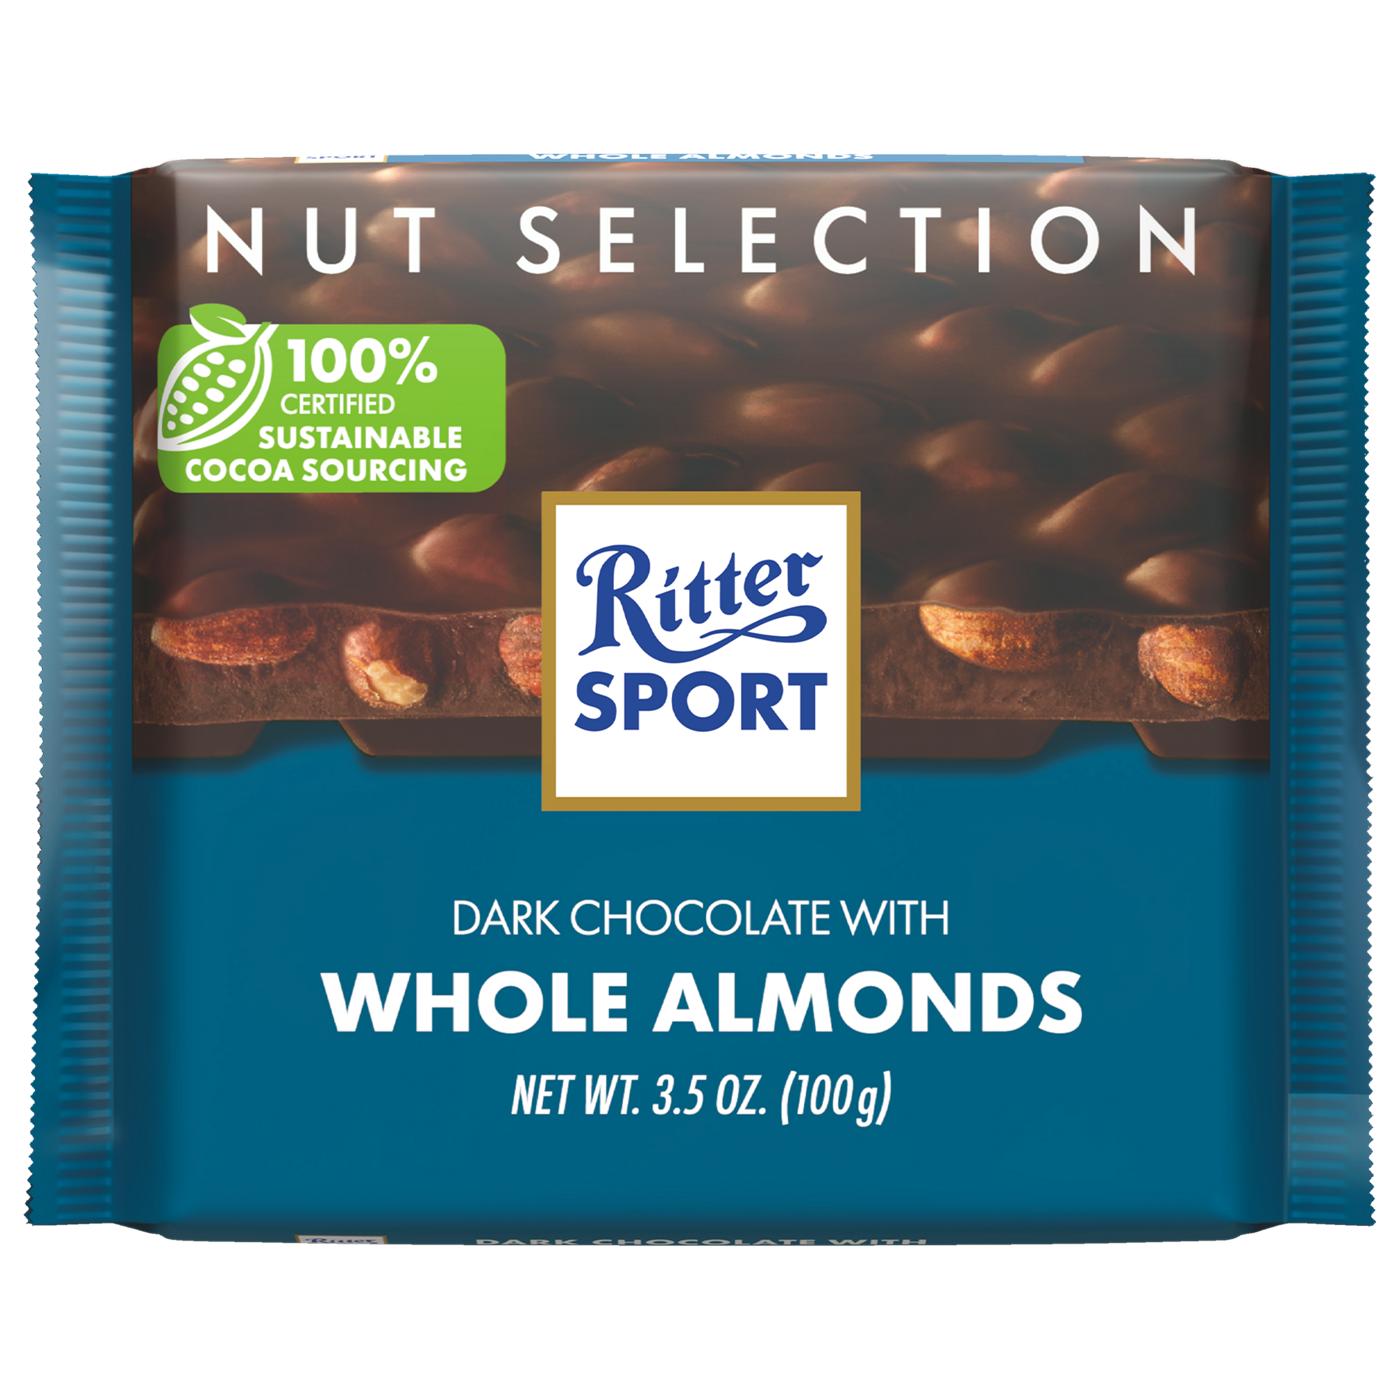 Ritter Sport Dark Chocolate with Whole Almonds; image 1 of 3